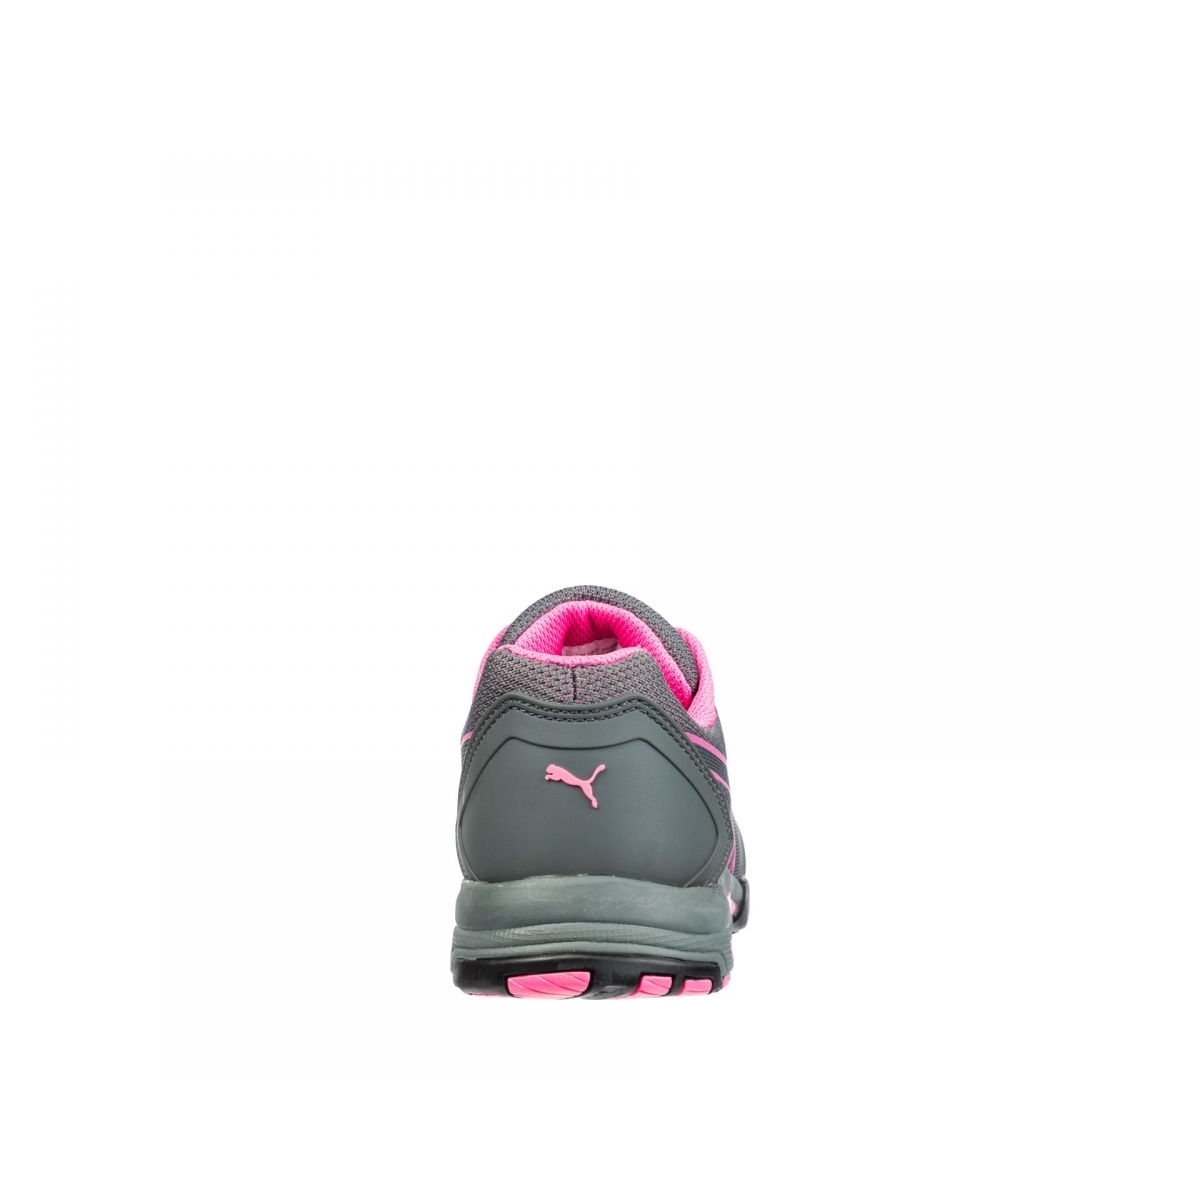 PUMA Safety Women's Celerity Knit Low Steel Toe ESD Work Shoe Pink - 642915 ONE SIZE PINK - PINK, 6